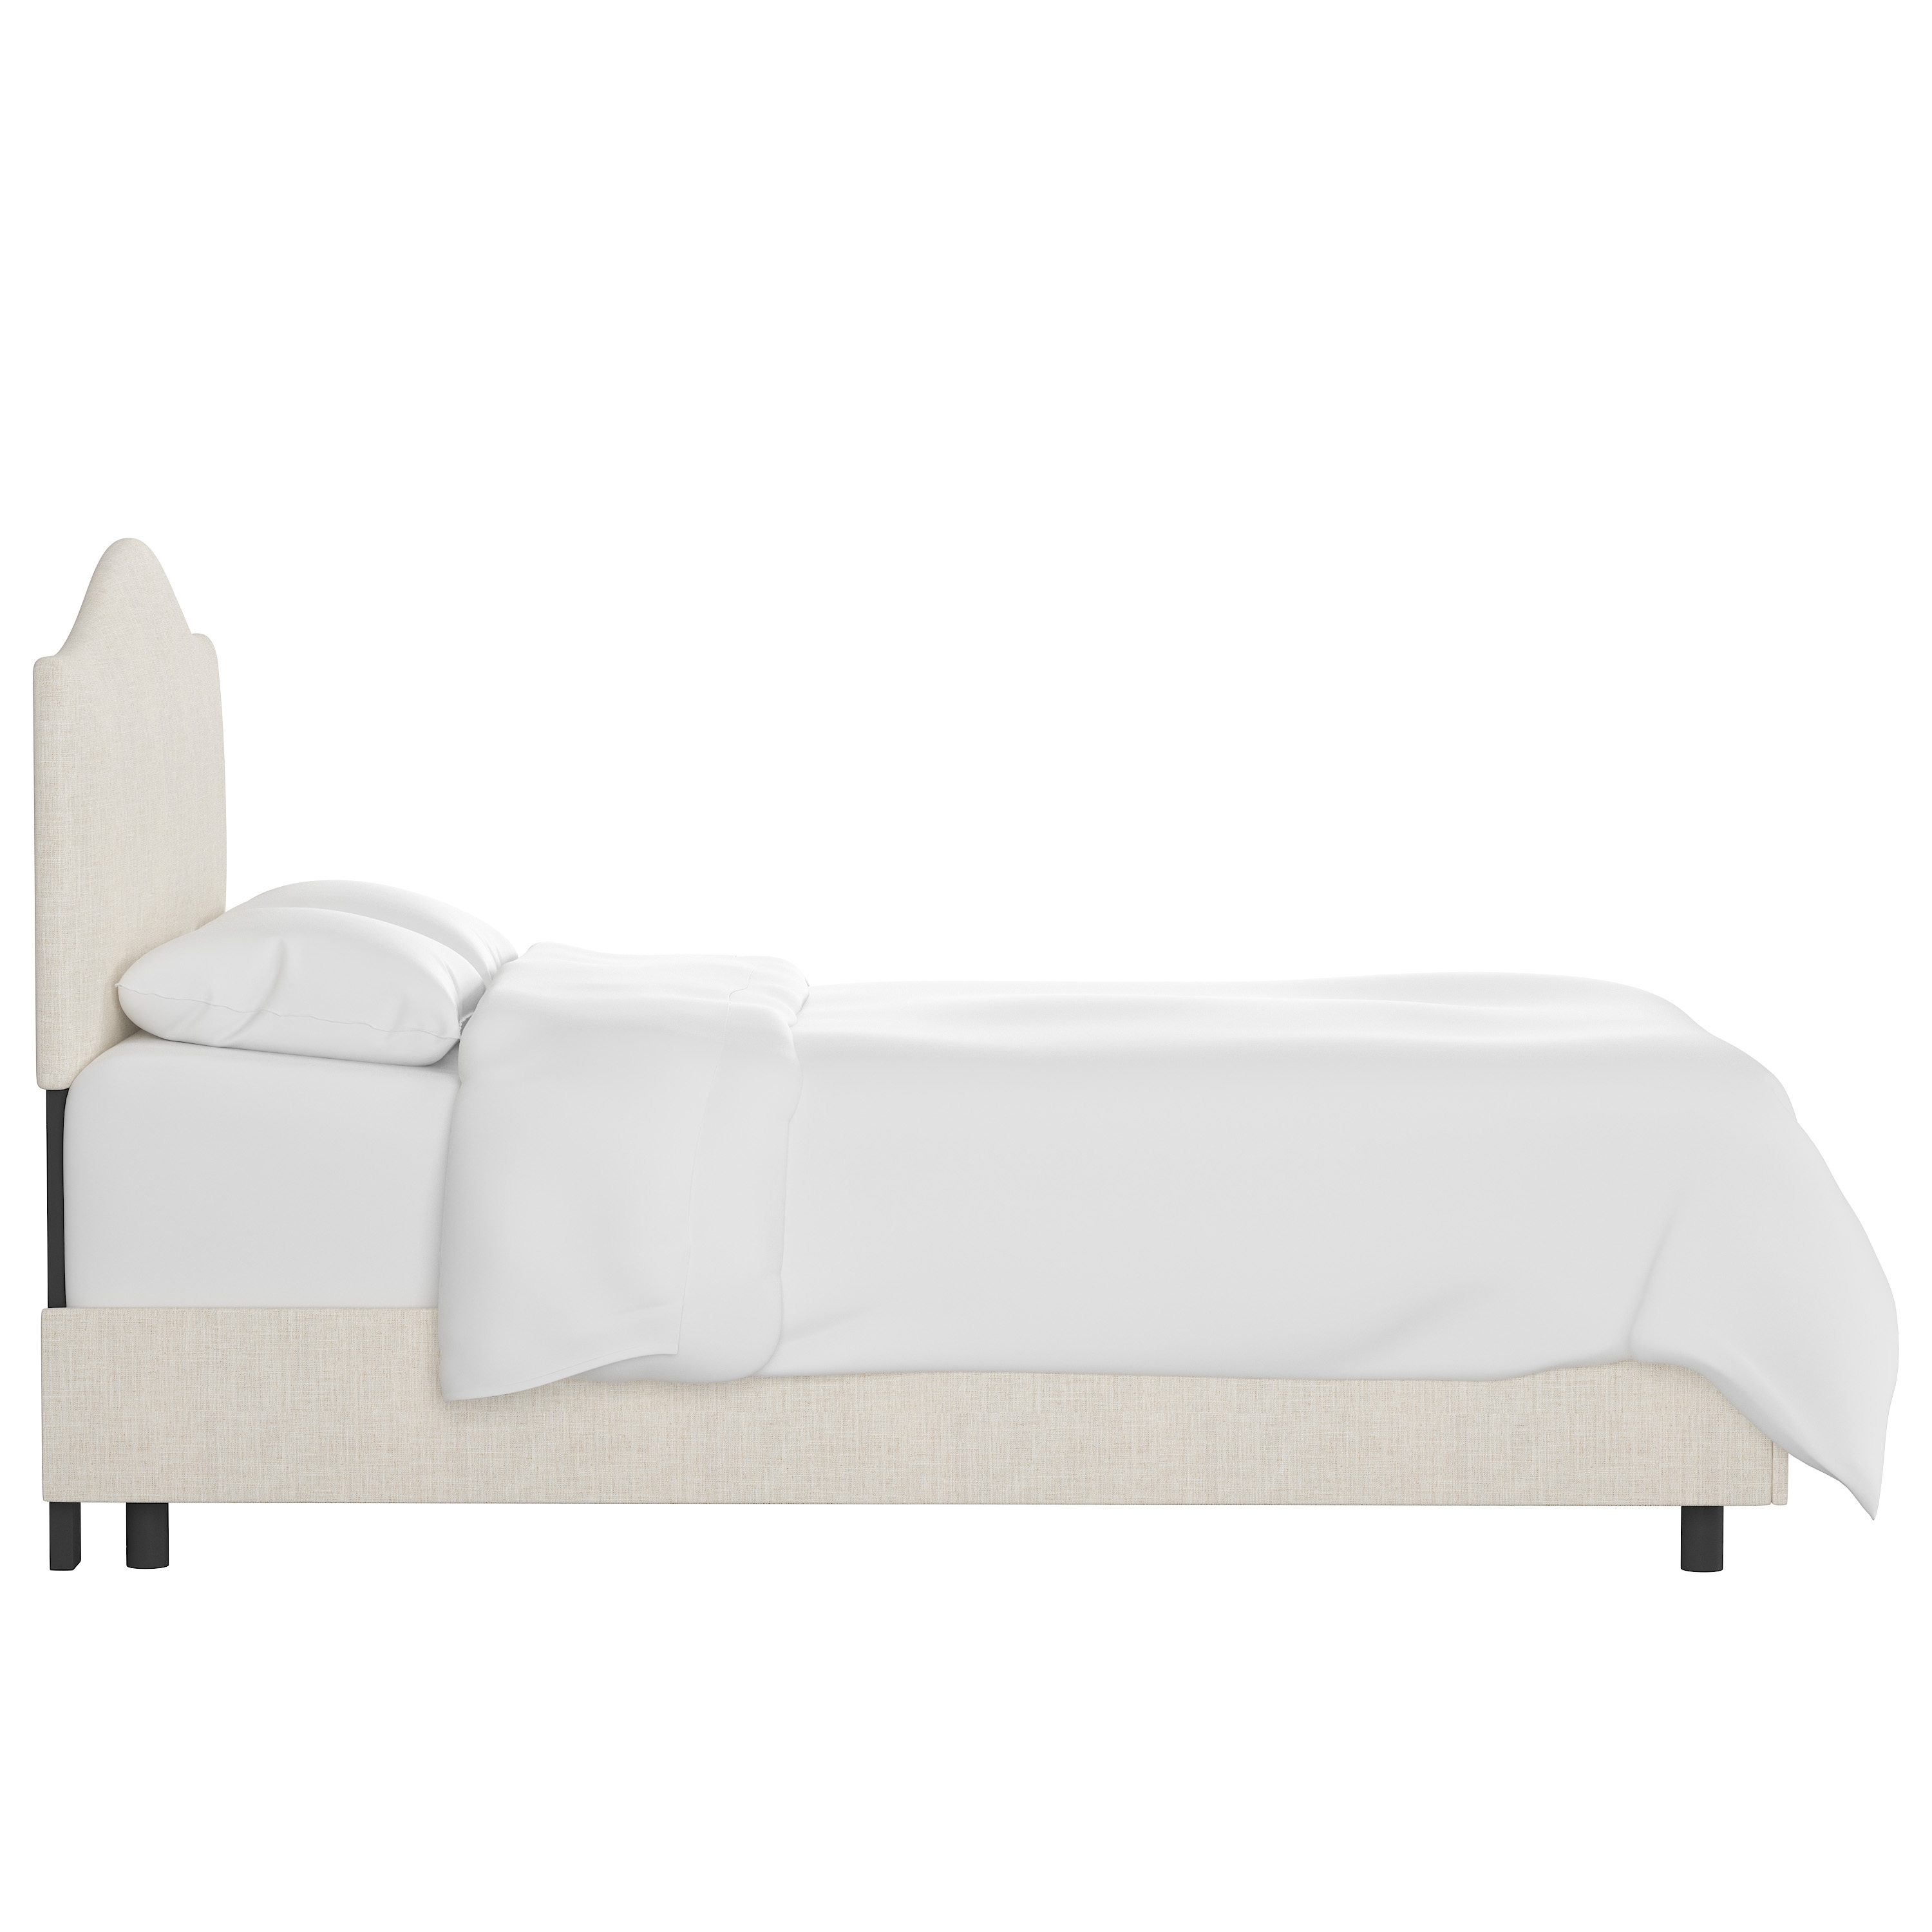 King Kenmore Bed in Linen Talc - Image 2